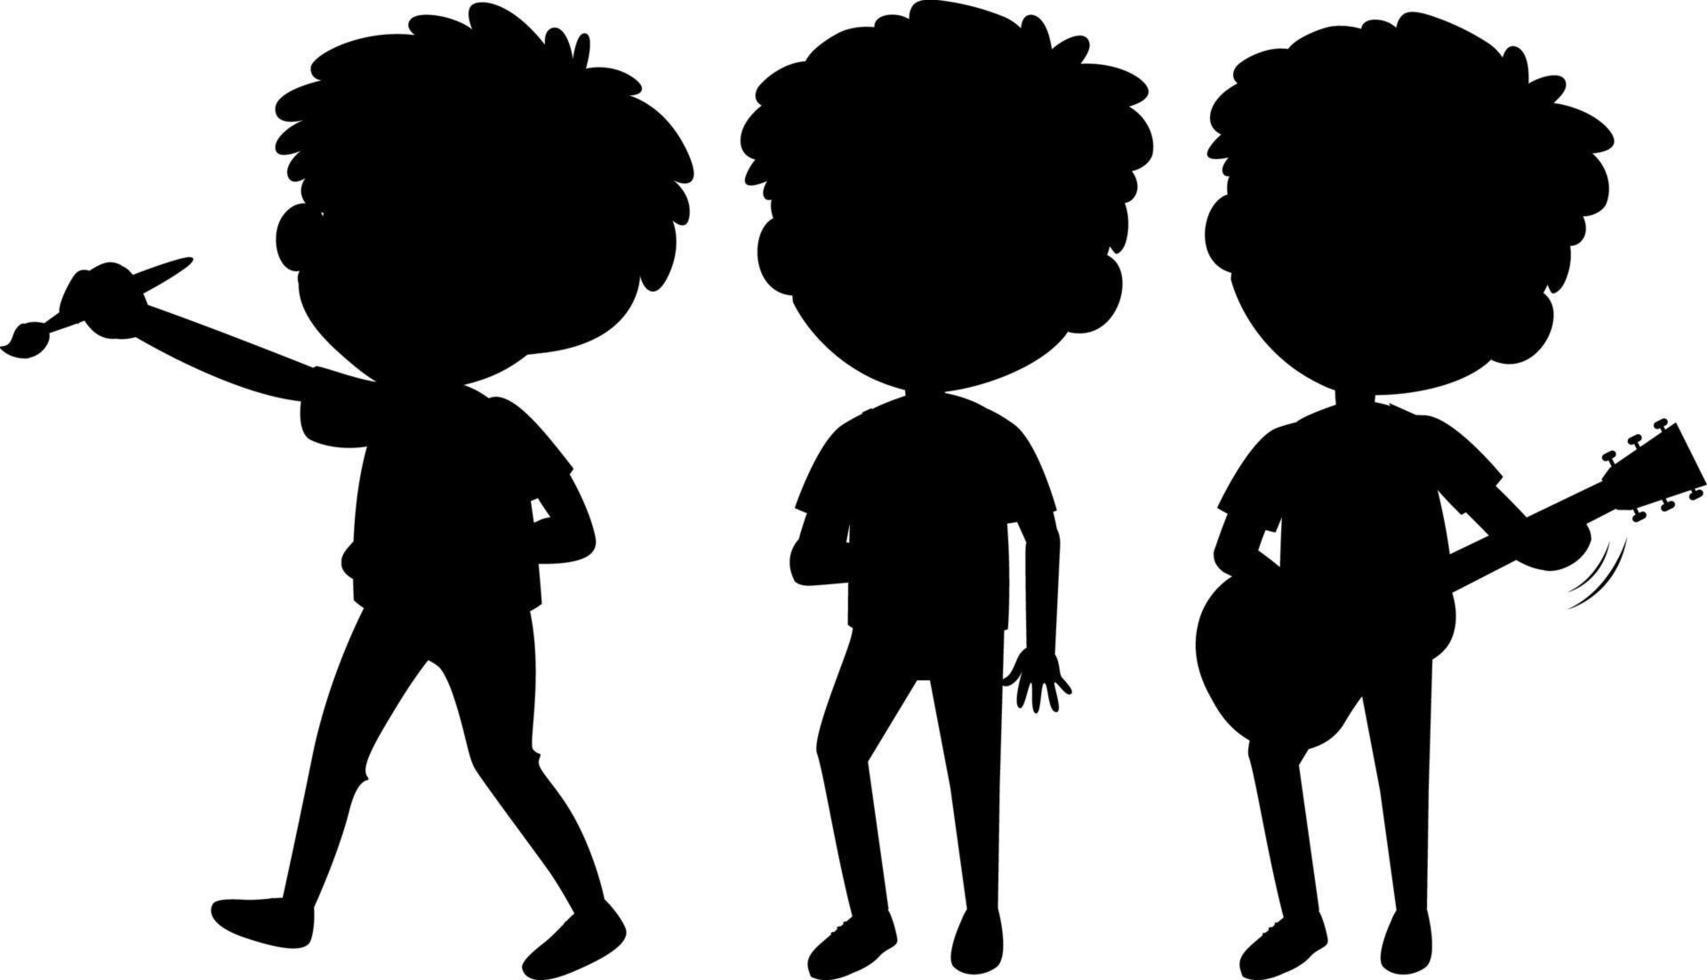 Cartoon character of kids silhouette on white background vector